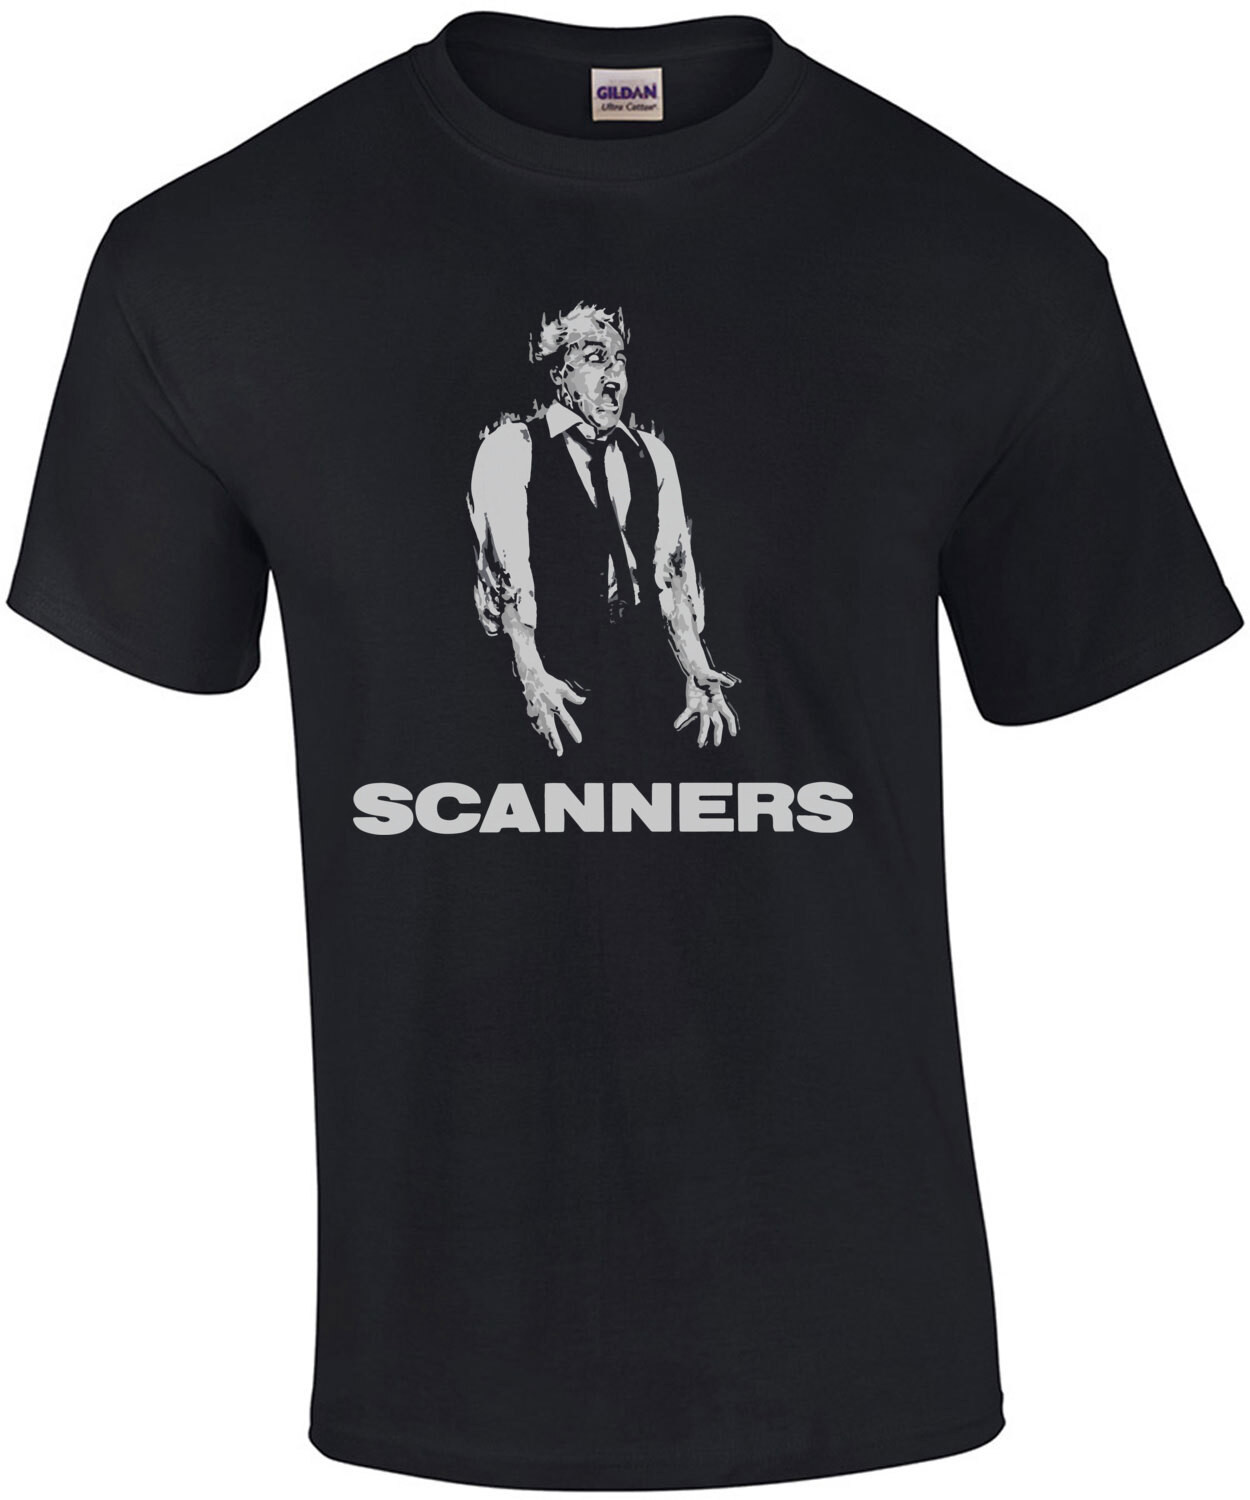 Scanners Movie - 80's T-Shirt